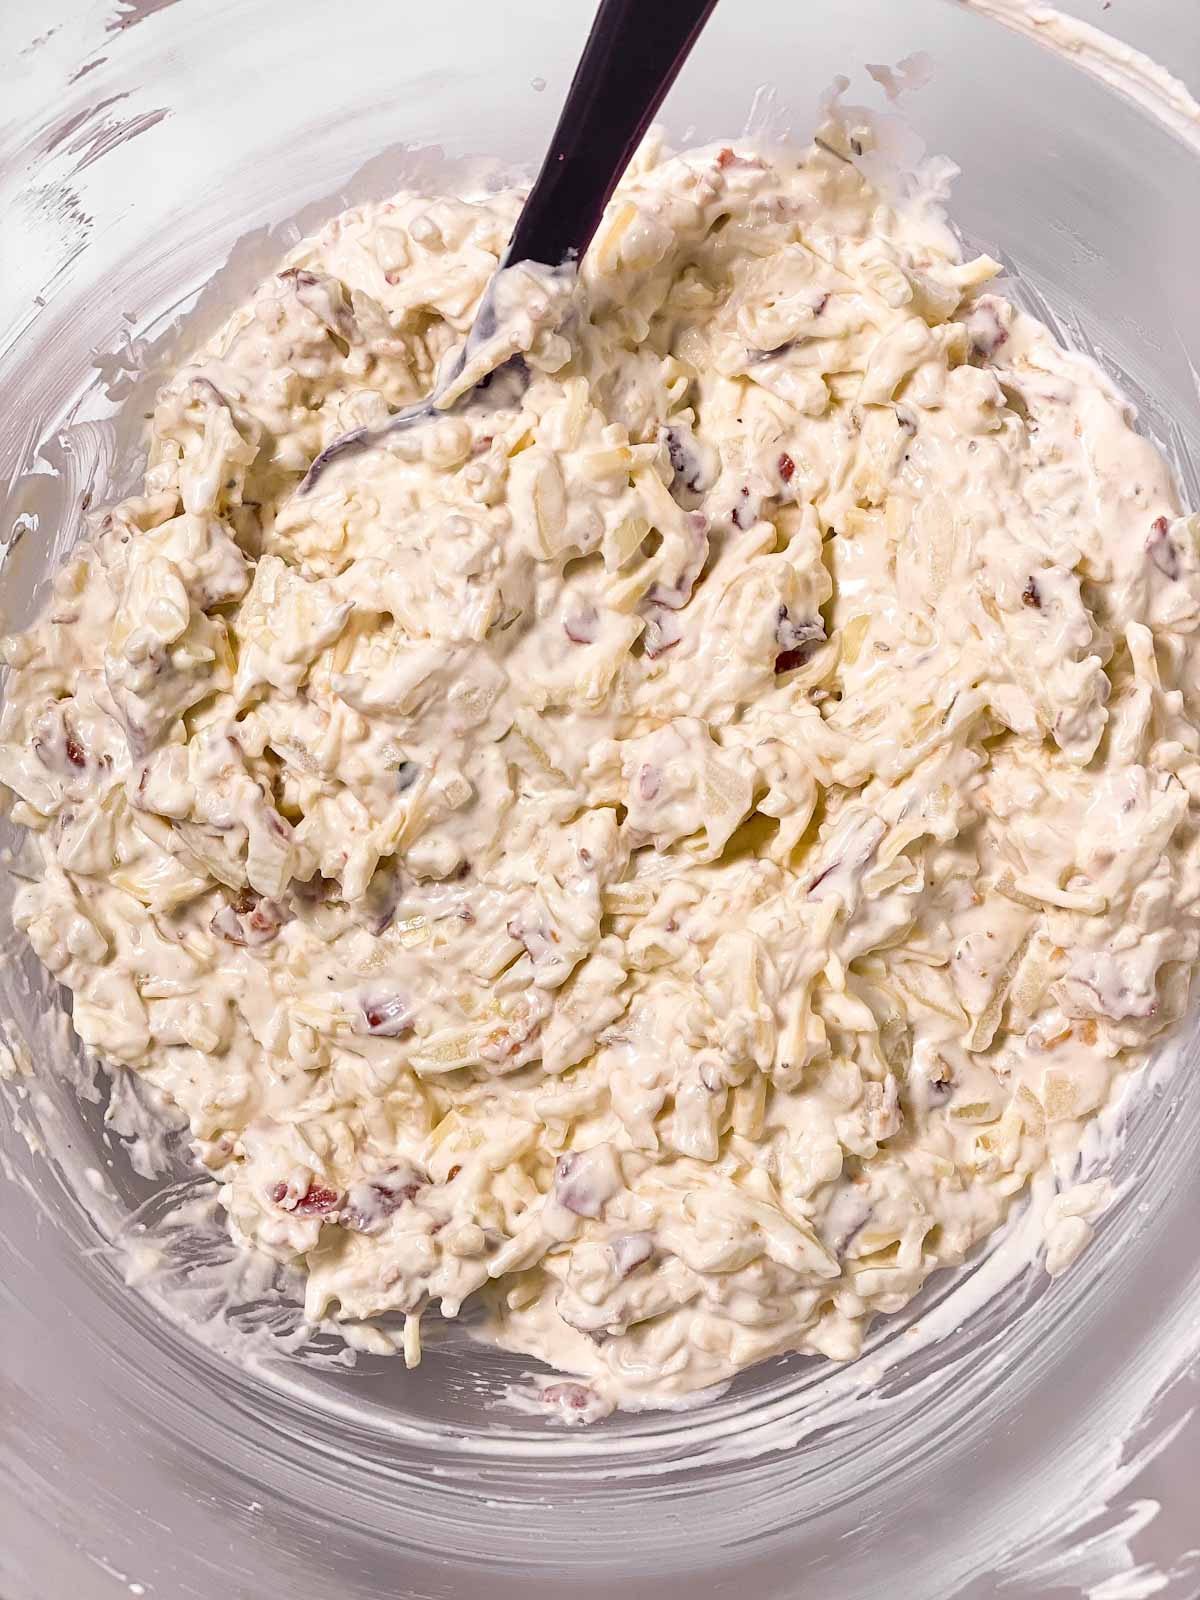 hot onion dip mix in glass mix